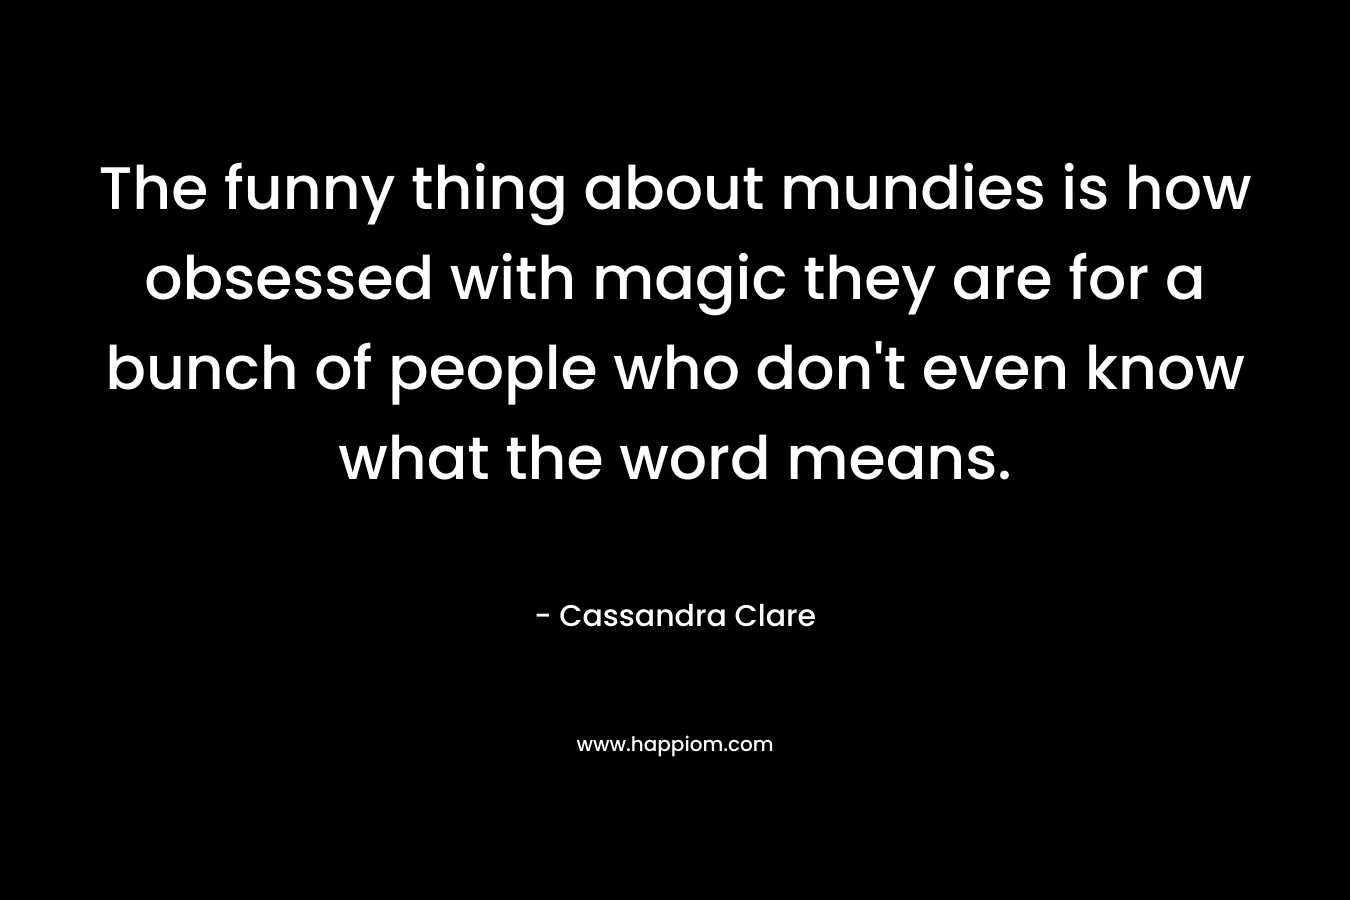 The funny thing about mundies is how obsessed with magic they are for a bunch of people who don’t even know what the word means. – Cassandra Clare